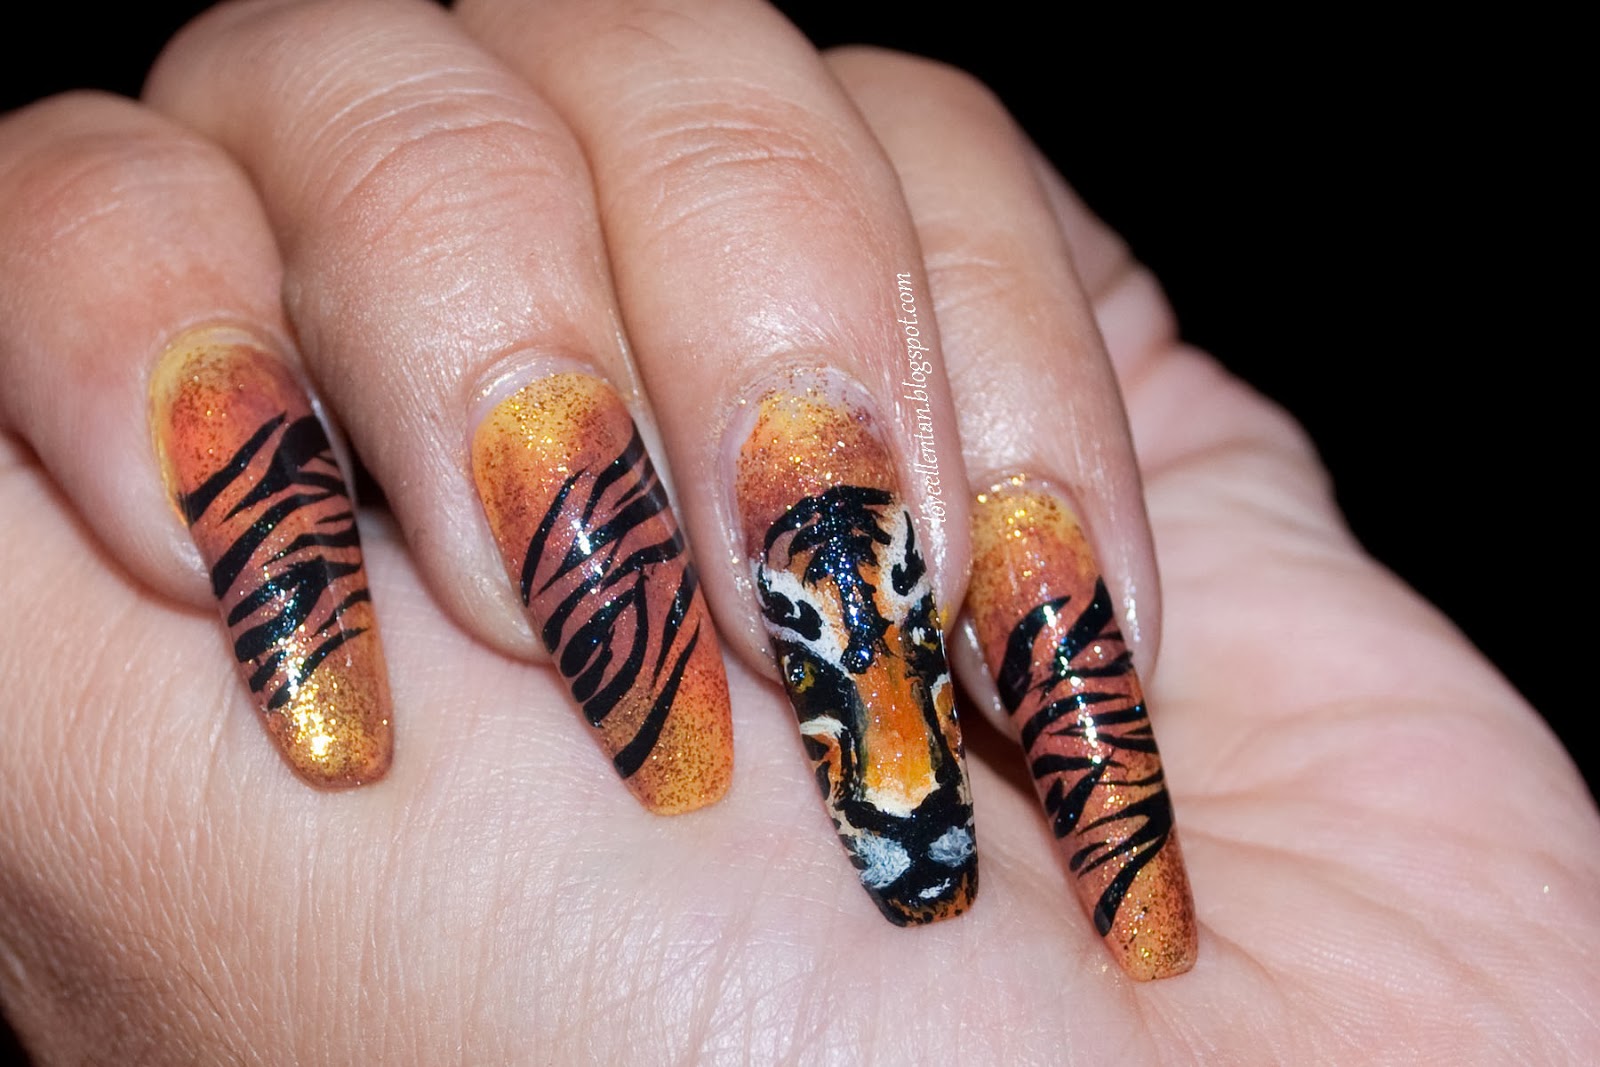 3. 30+ Eye-Catching Tiger Nail Designs for Wild and Fierce Look - wide 4